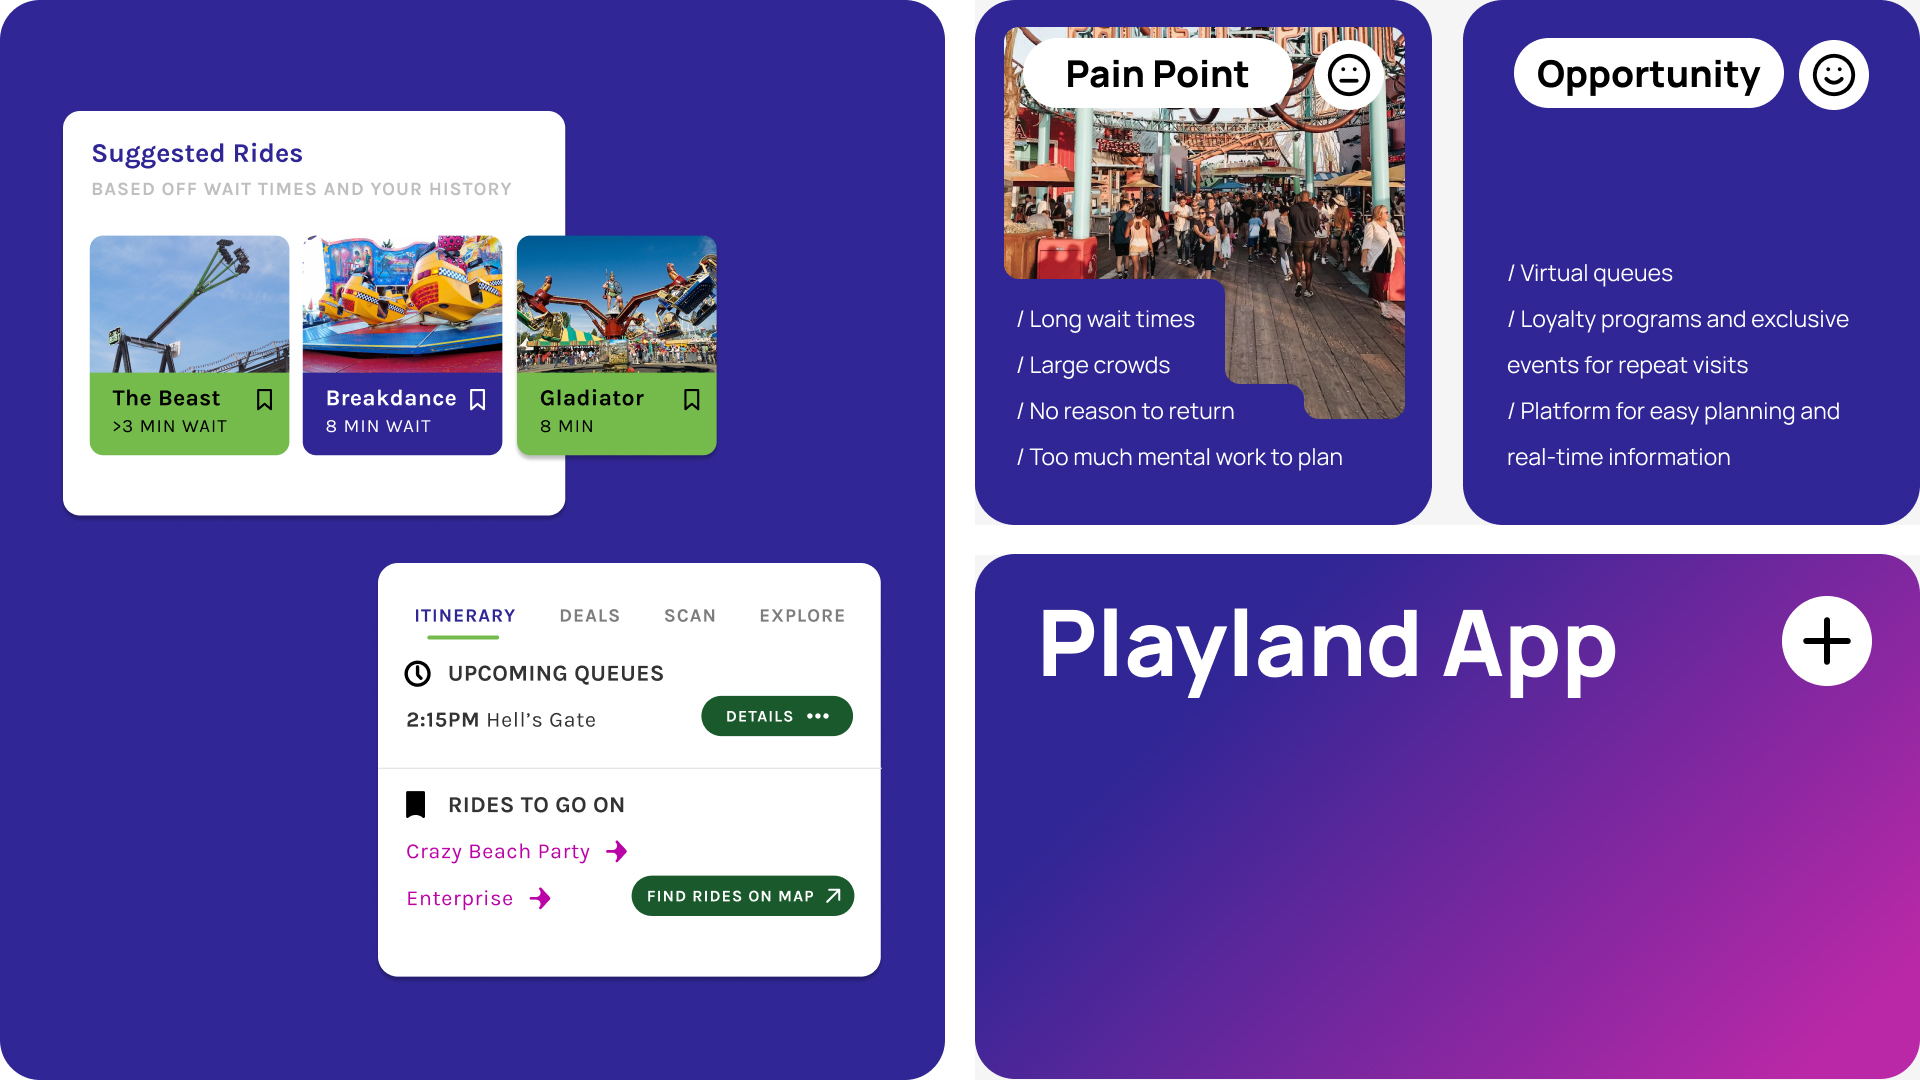 Summary of pain points and opportunity statements for experiences at Playland.